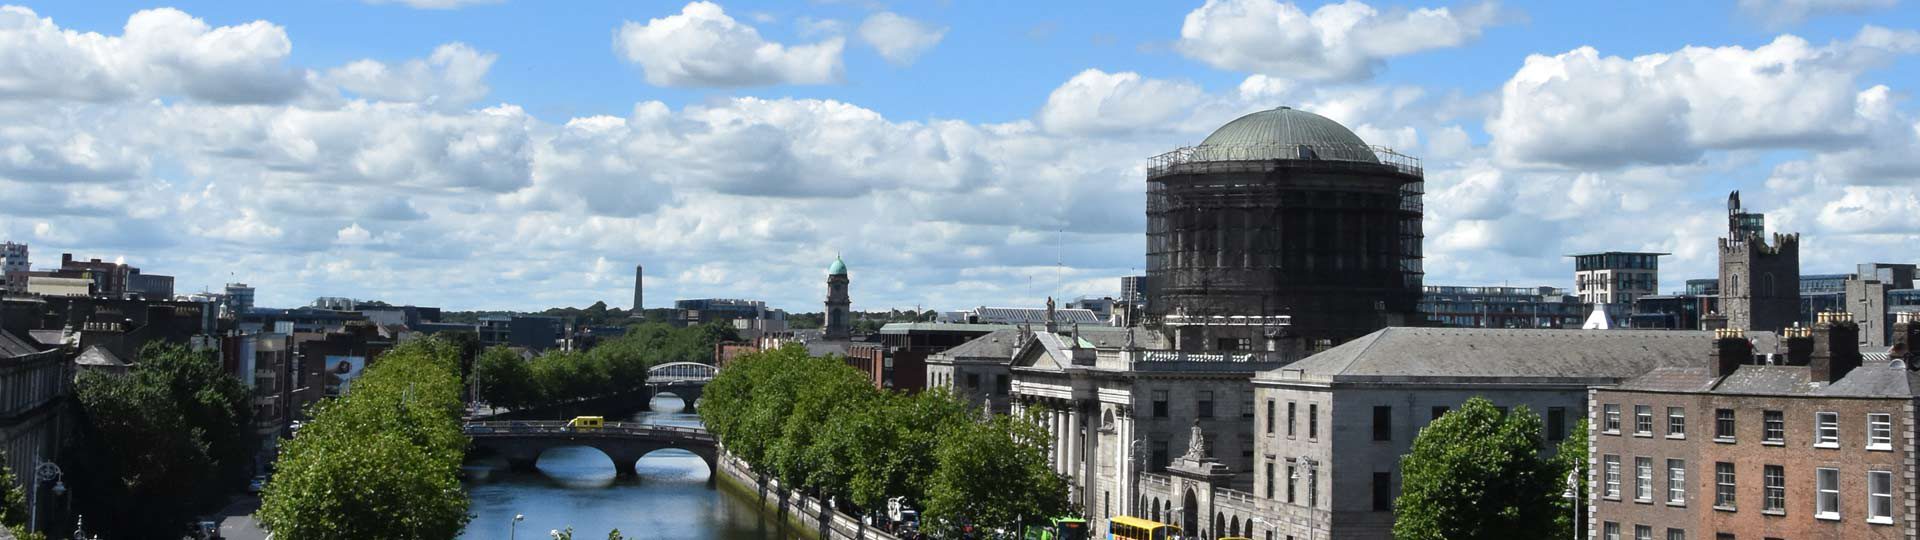 River view Dublin with Four Courts